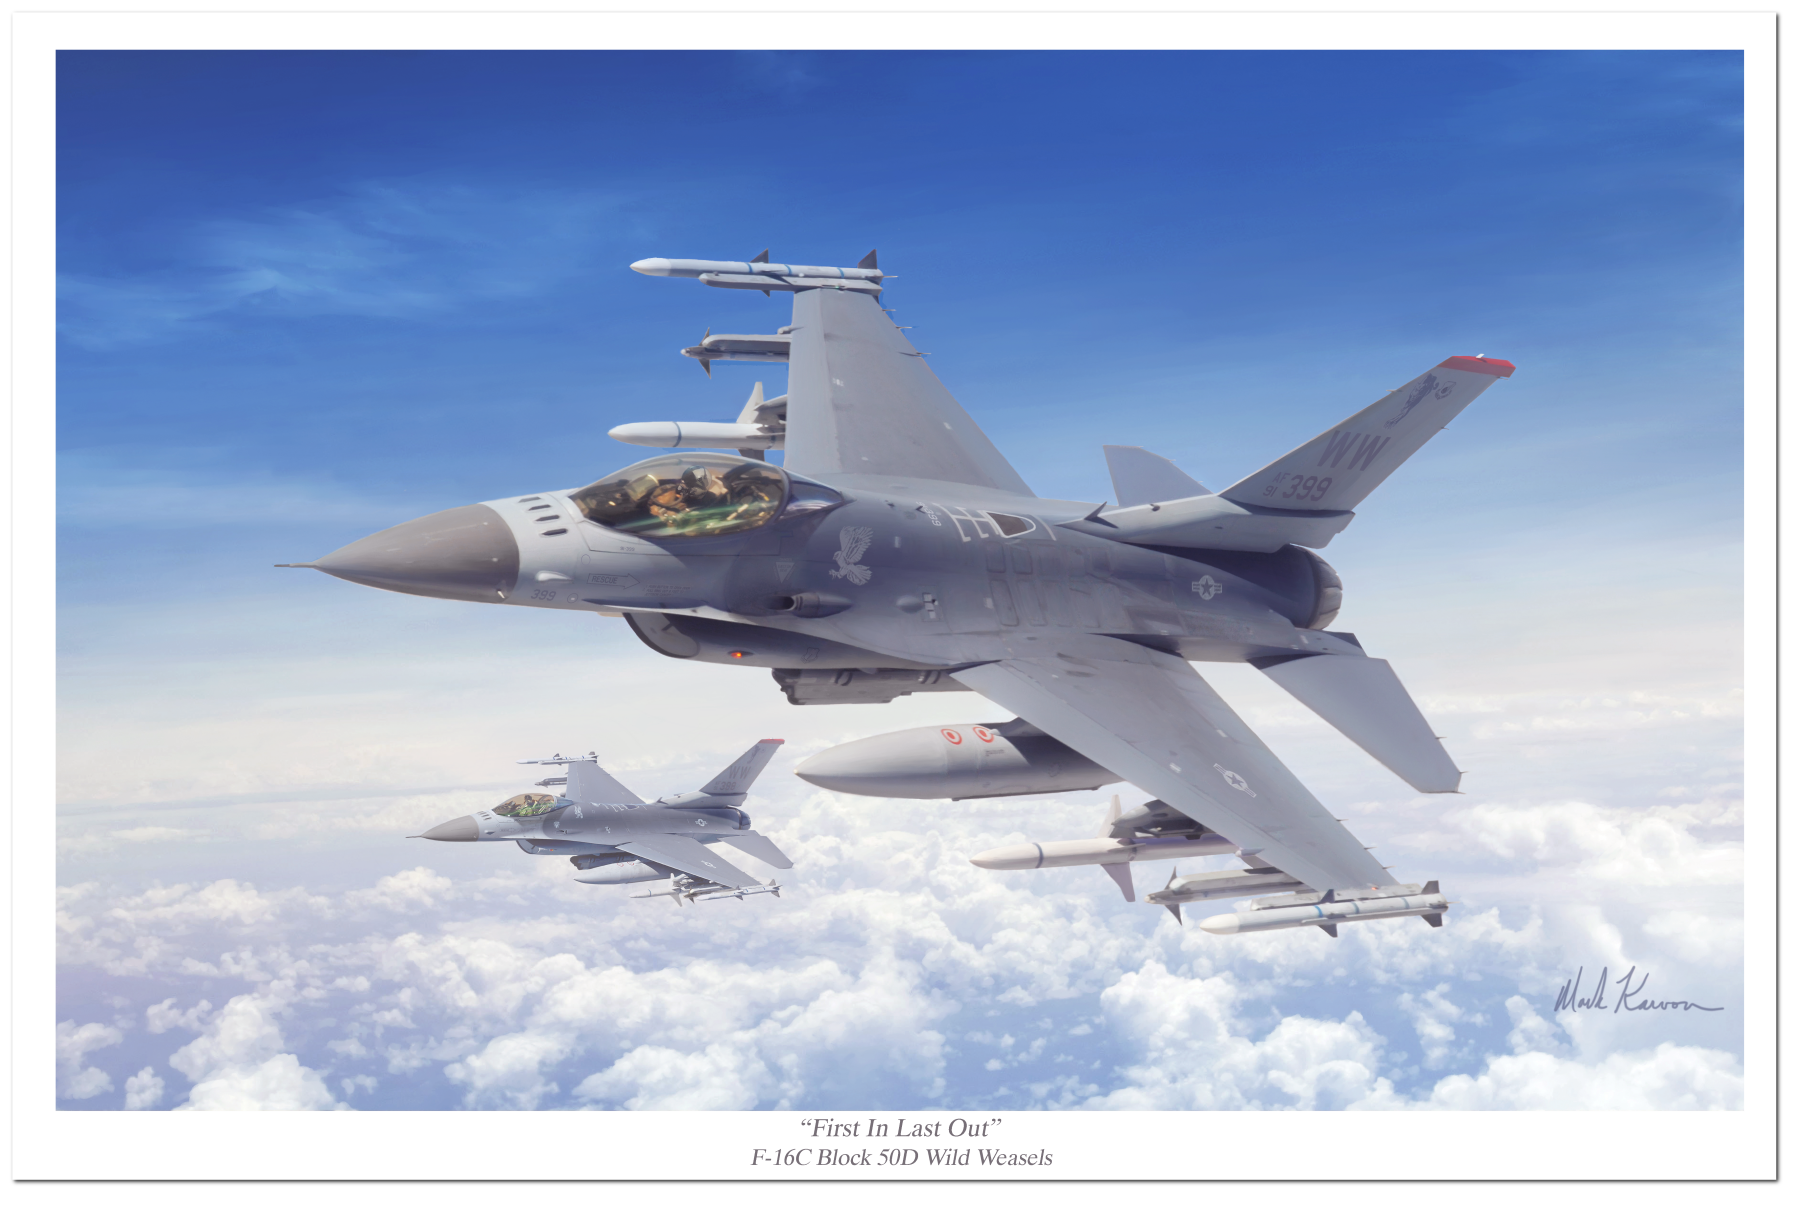 "First In, Last Out" by Mark Karvon featuring the USAF F-16C Fighting Falcon